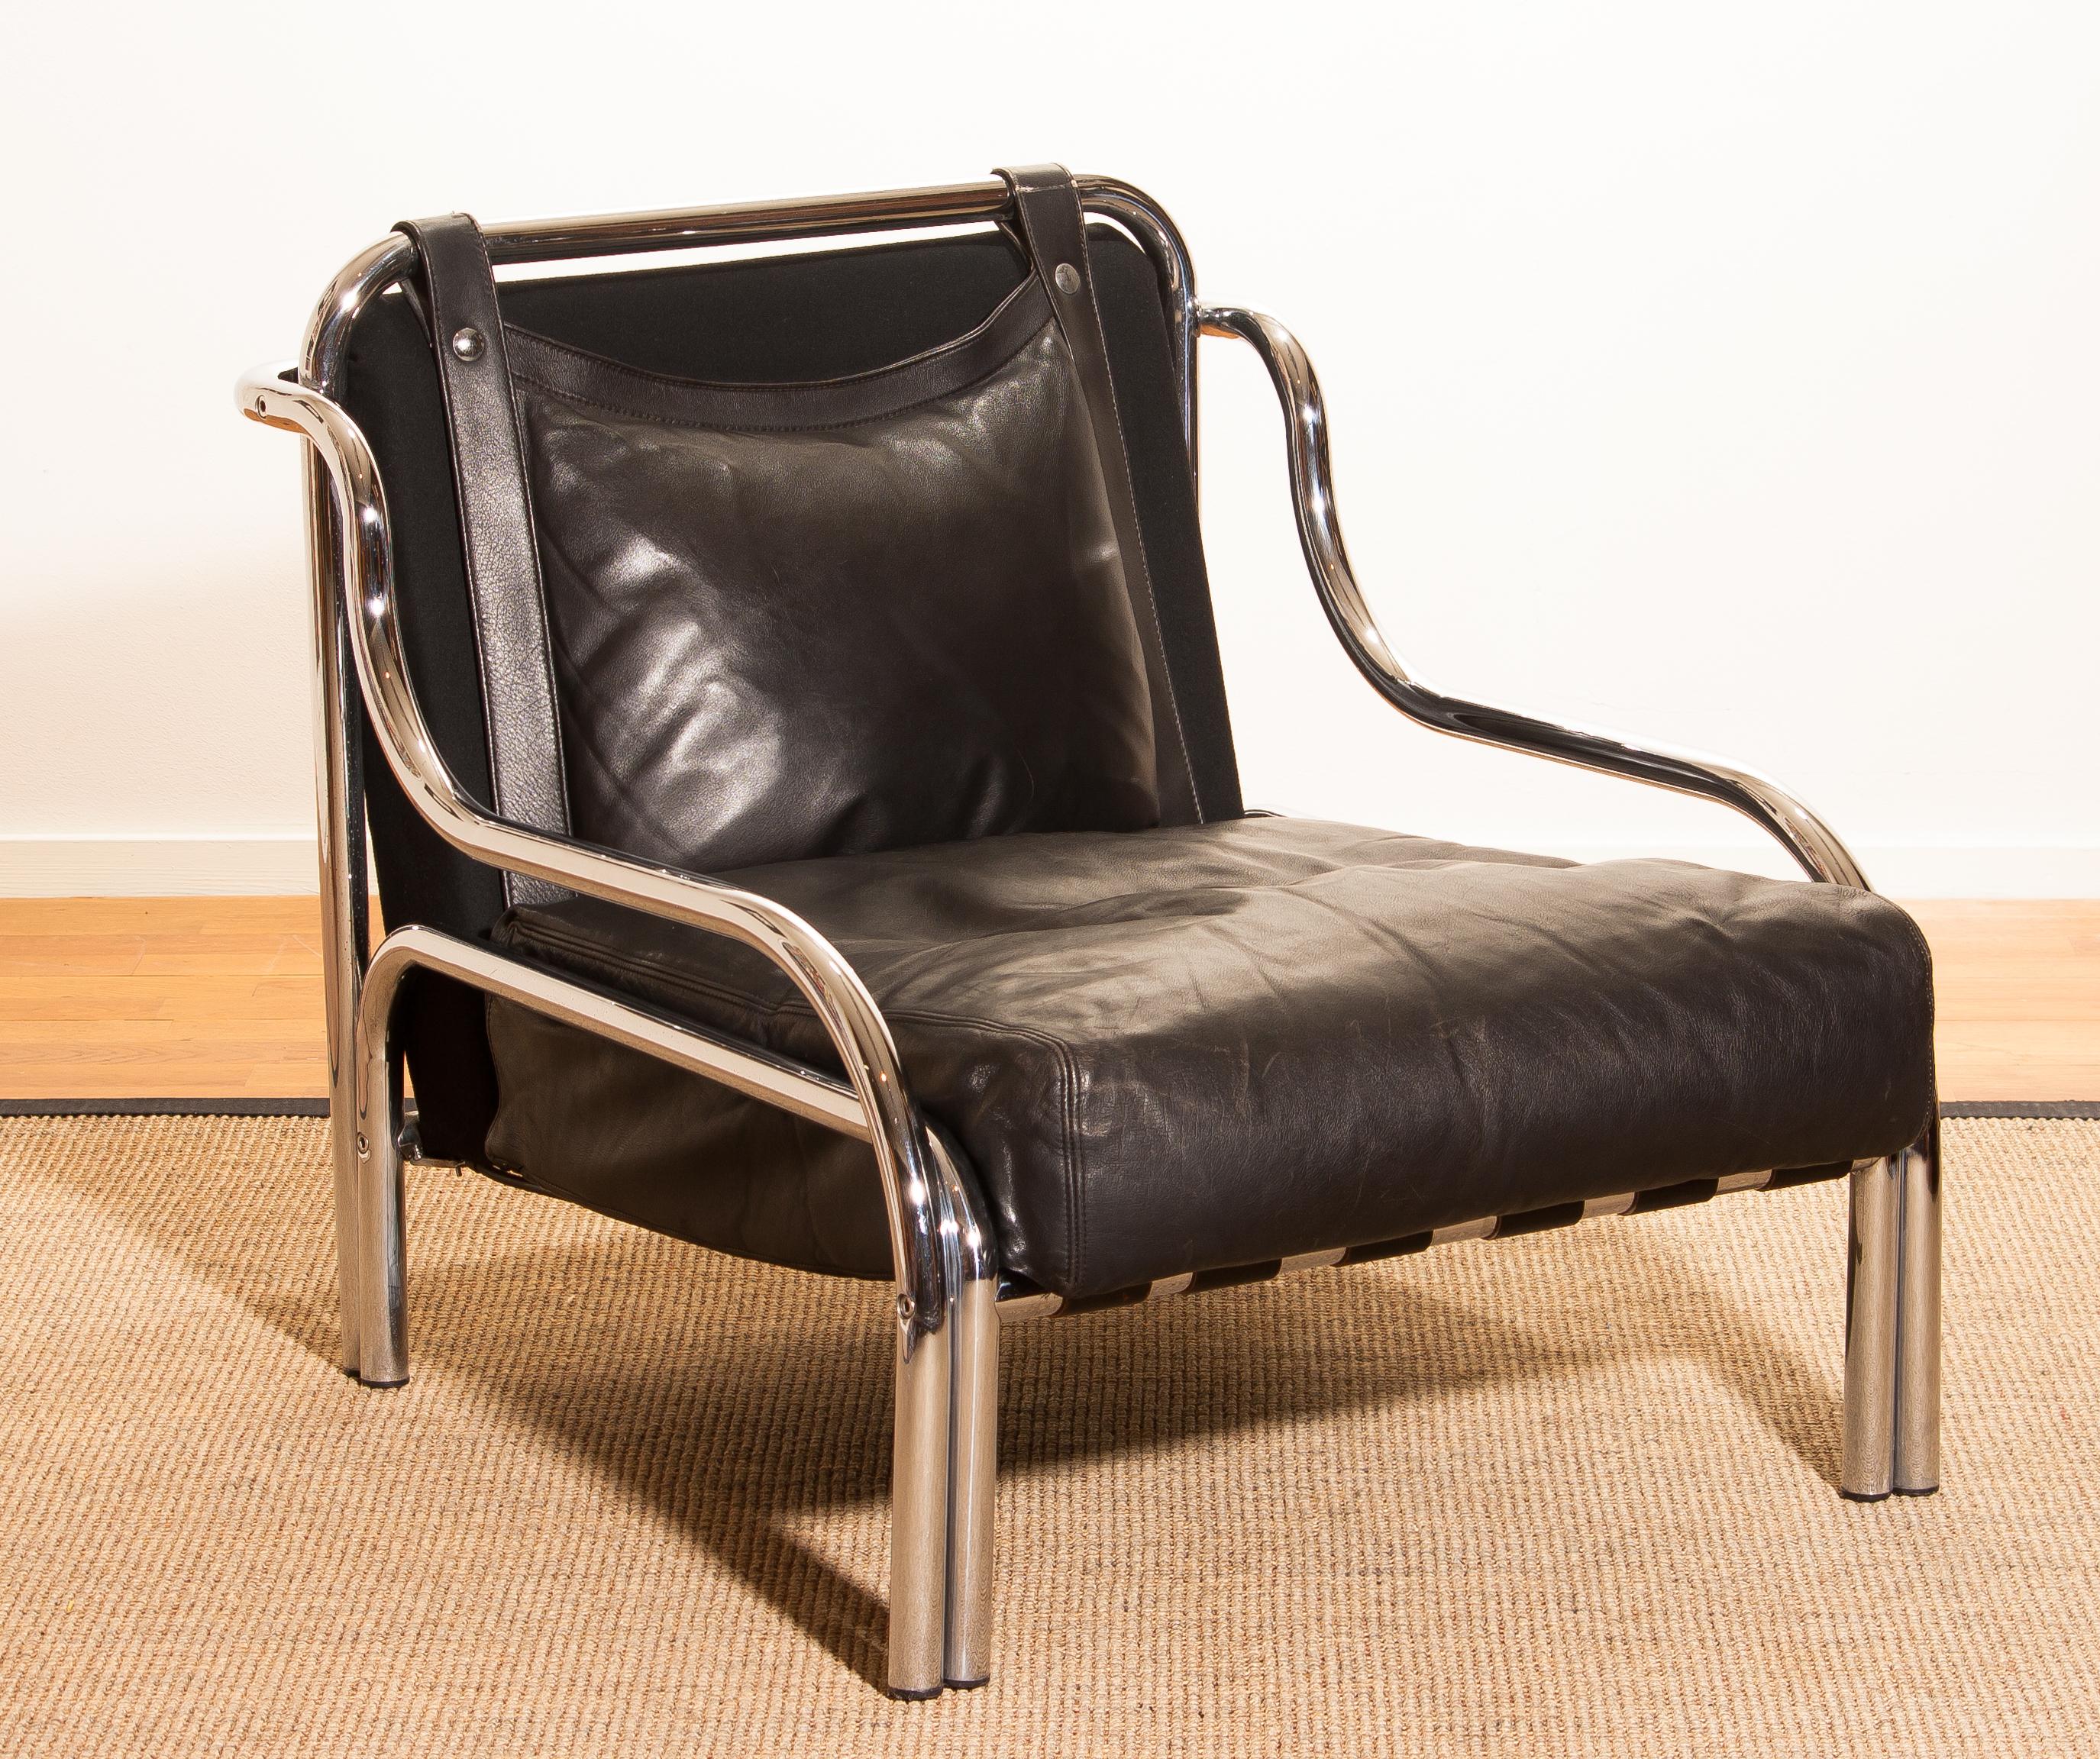 Wonderful lounge chair designed by Gae Aulenti for Poltronova, Italy.
This beautiful chair is made of a black leather seating on a chromed frame.
It is in excellent condition.
Period 1960s
Dimensions: H 73 cm, W 71 cm, D 80 cm, SH 30 cm.
   